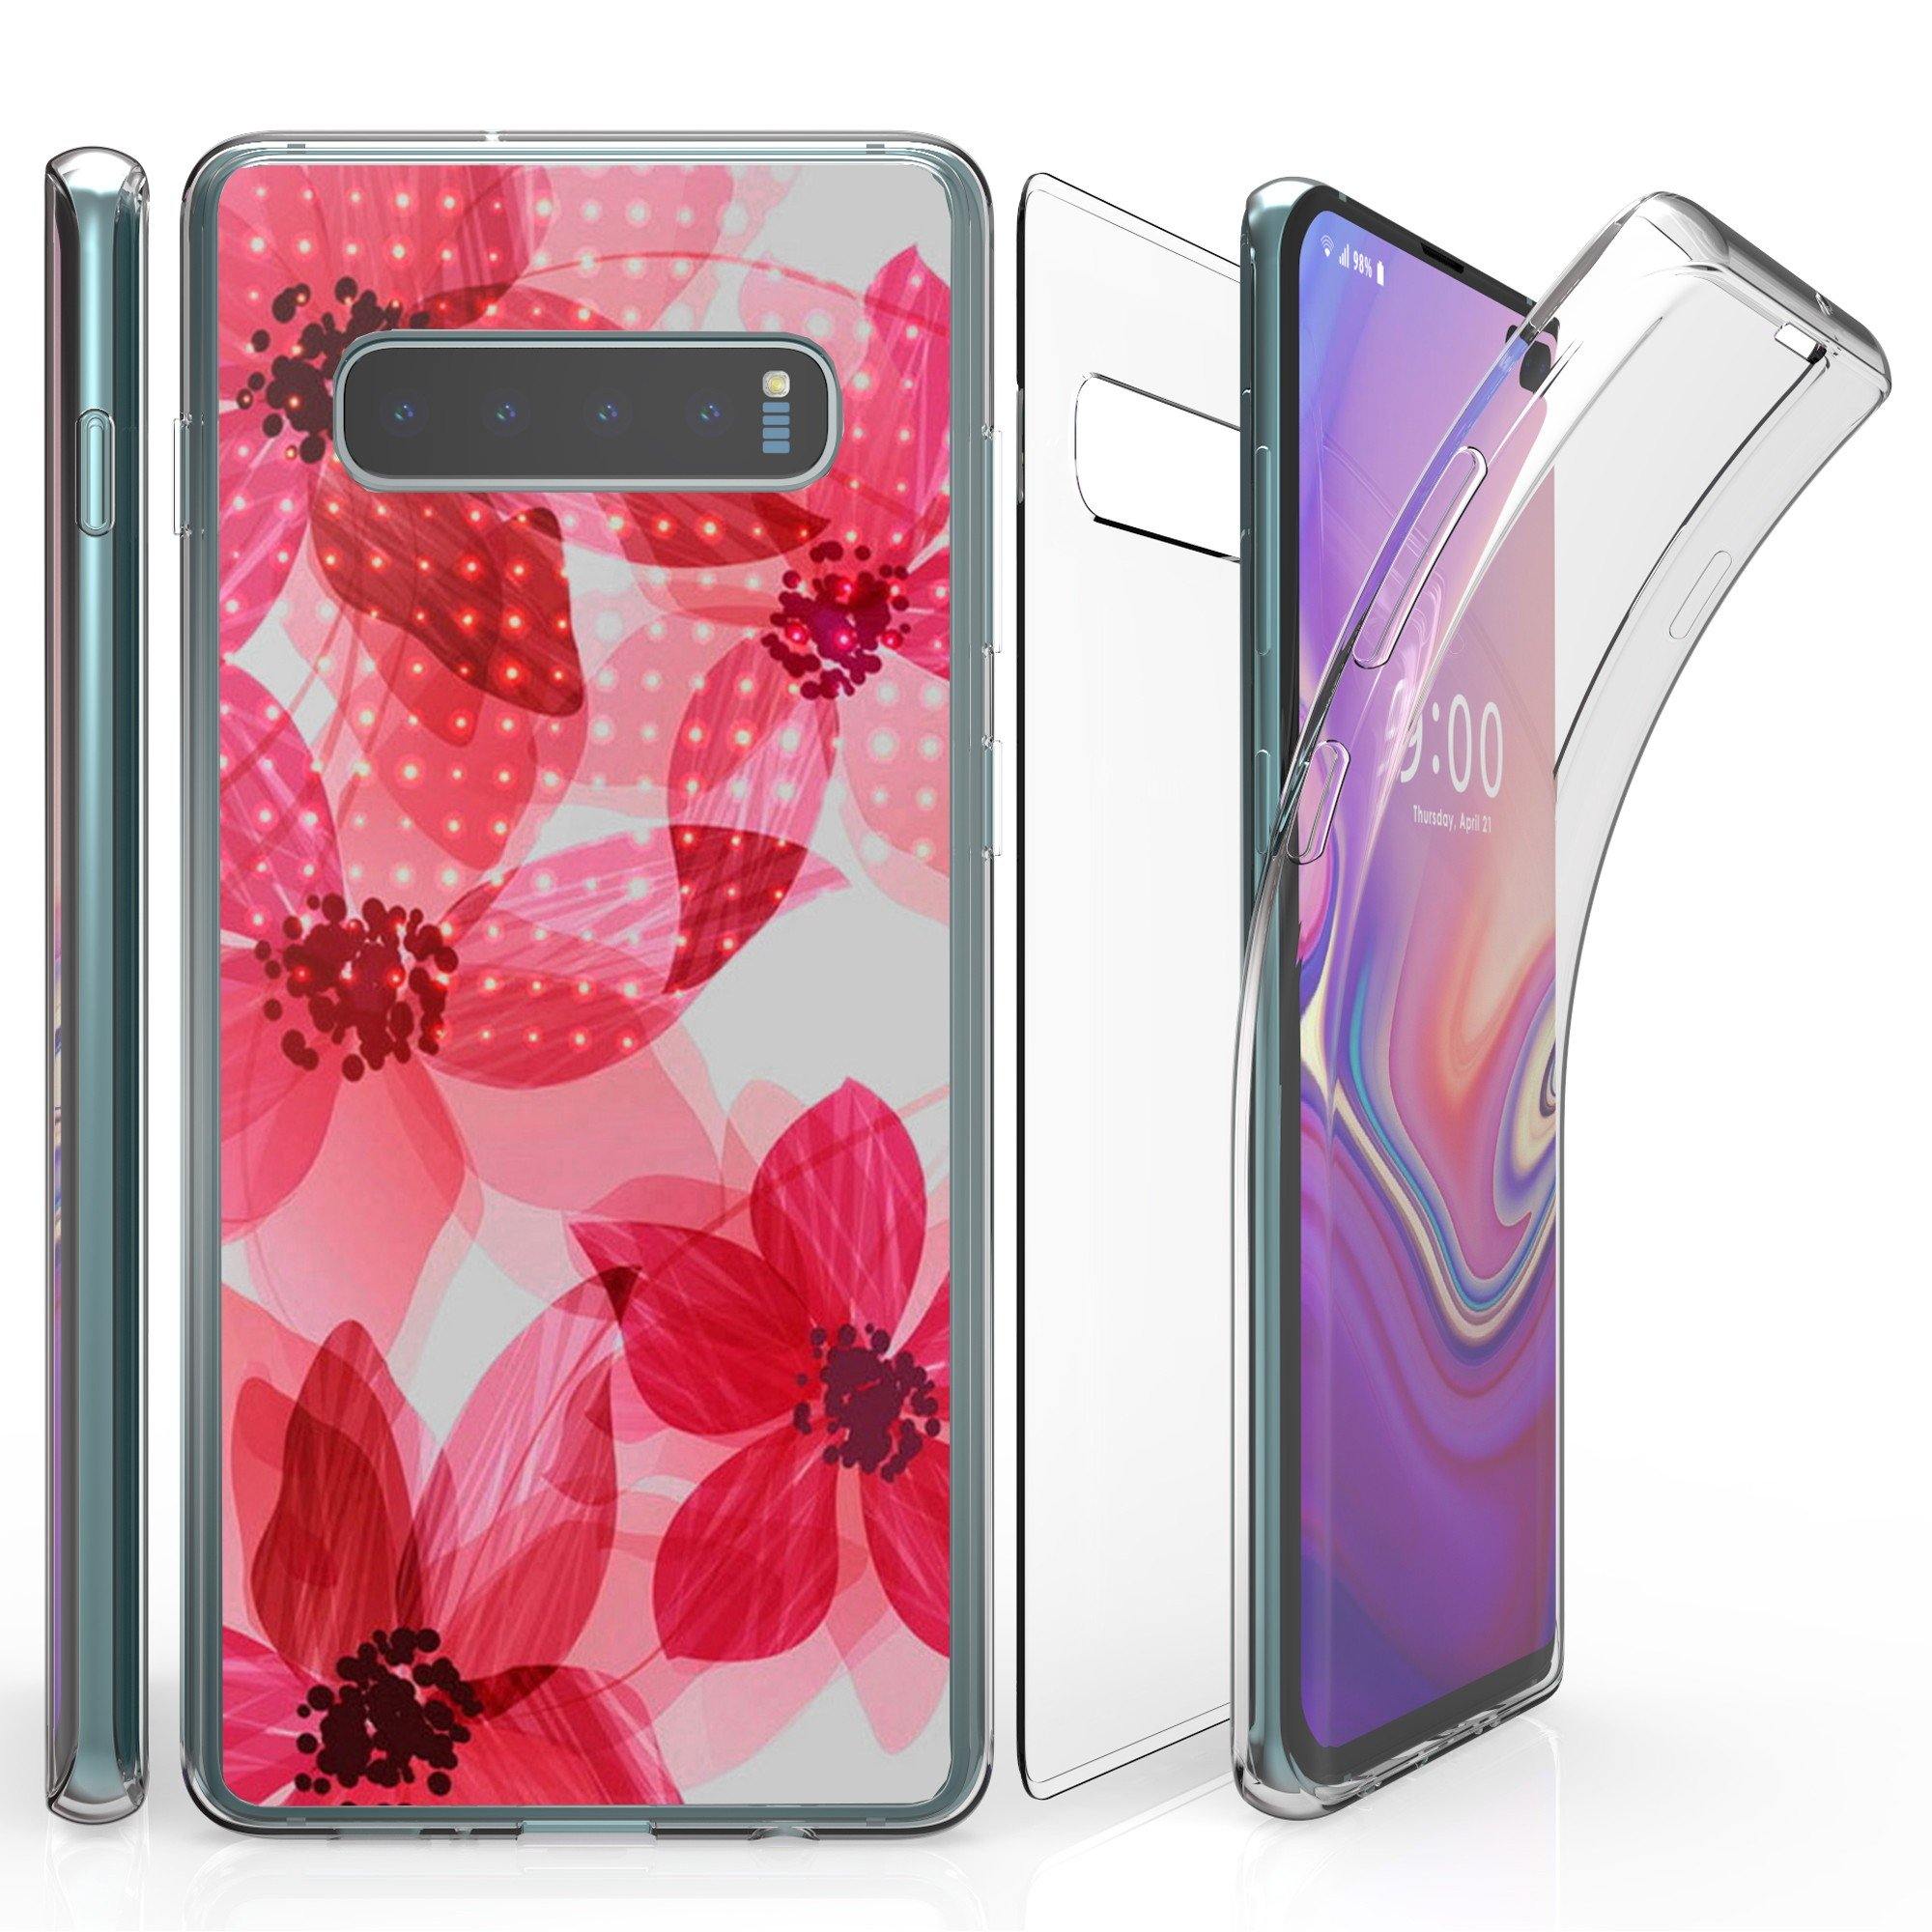 Tri Max Designed For Samsung Galaxy S10 Plus Case Transparent Clear - My BC Case